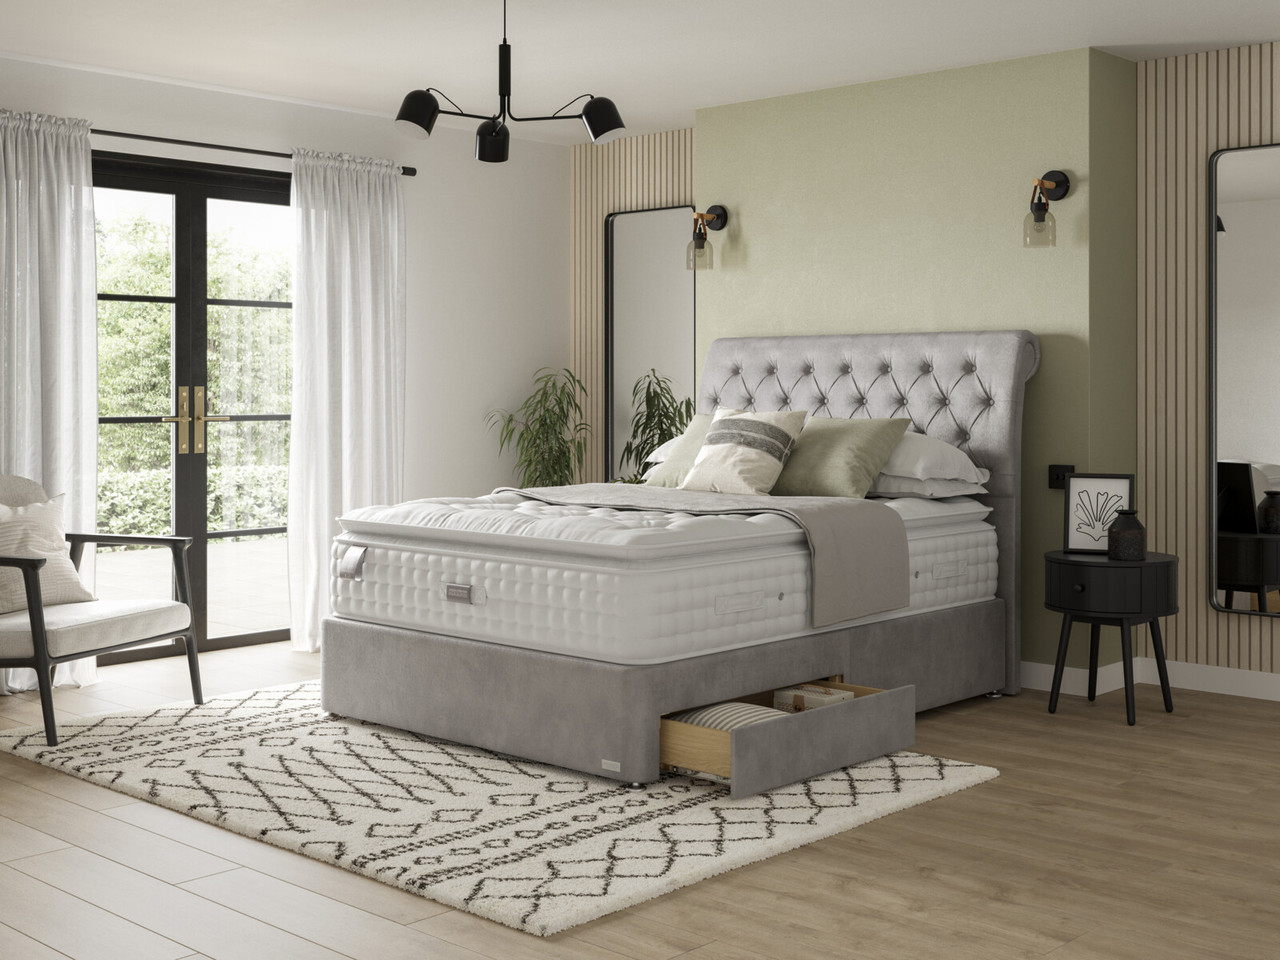 Staples And Co Artisan Deluxe Divan Bed Set On Glides King Castello Silver Grey